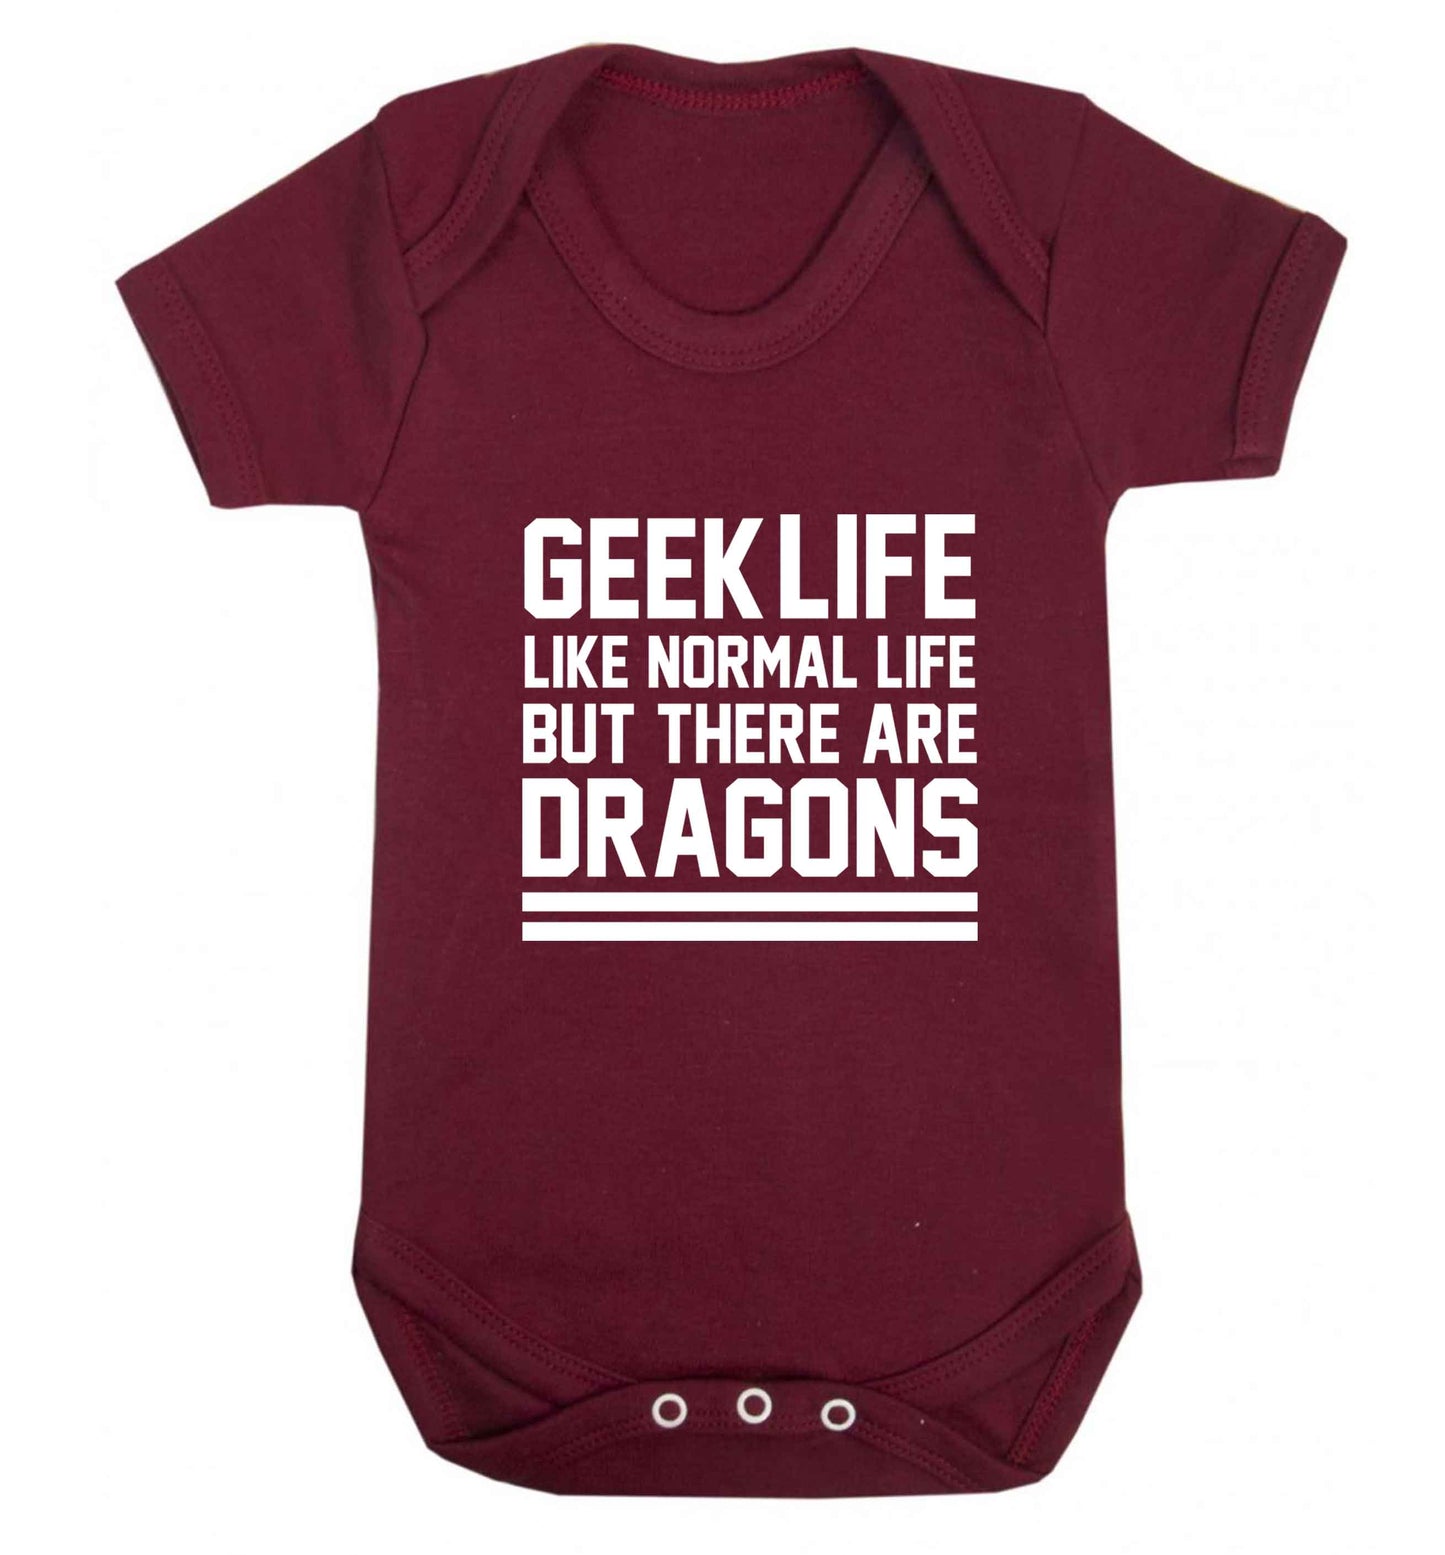 Geek life like normal life but there are dragons baby vest maroon 18-24 months